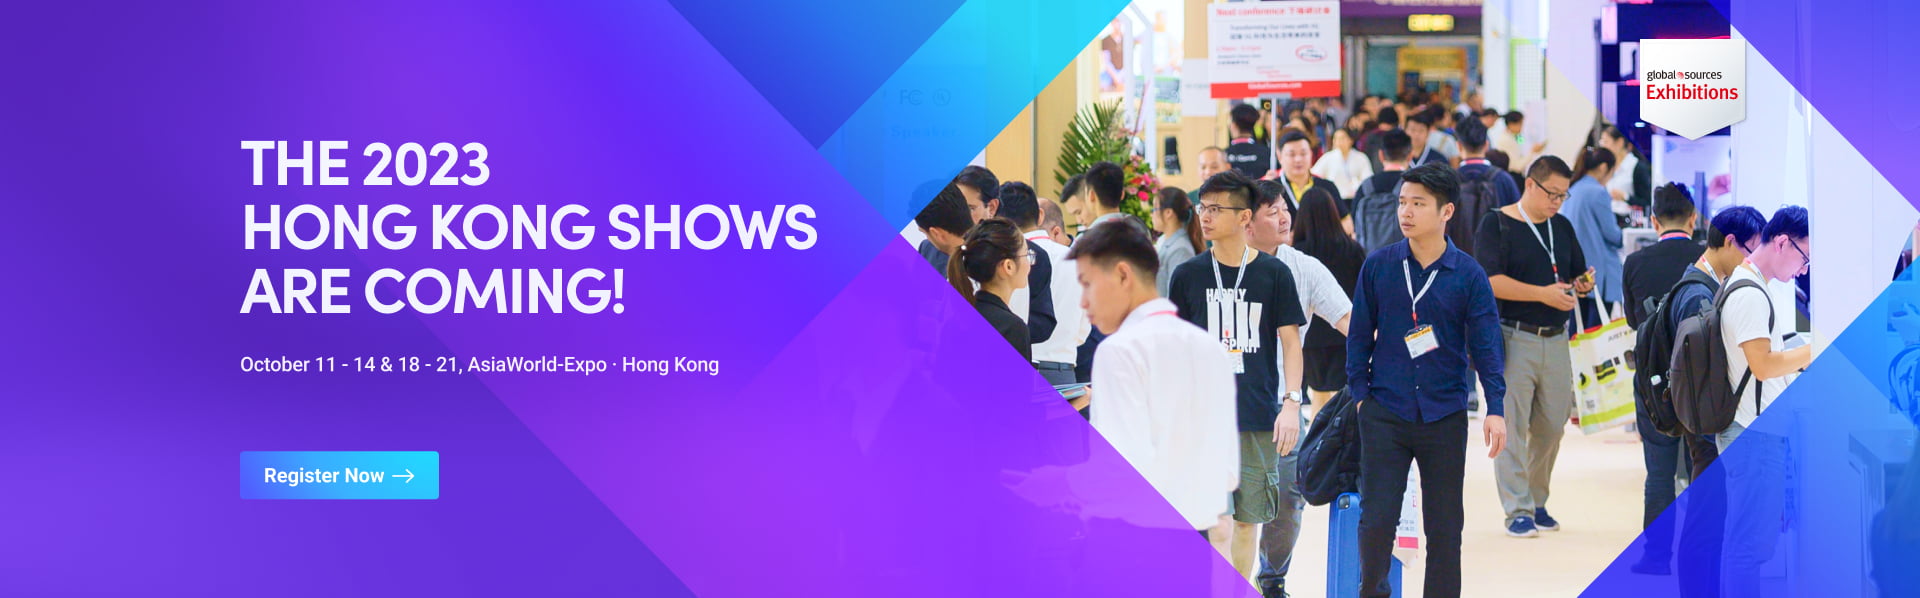 Hong Kong Trade Show, Expos & Exhibitions Global Sources (2022)